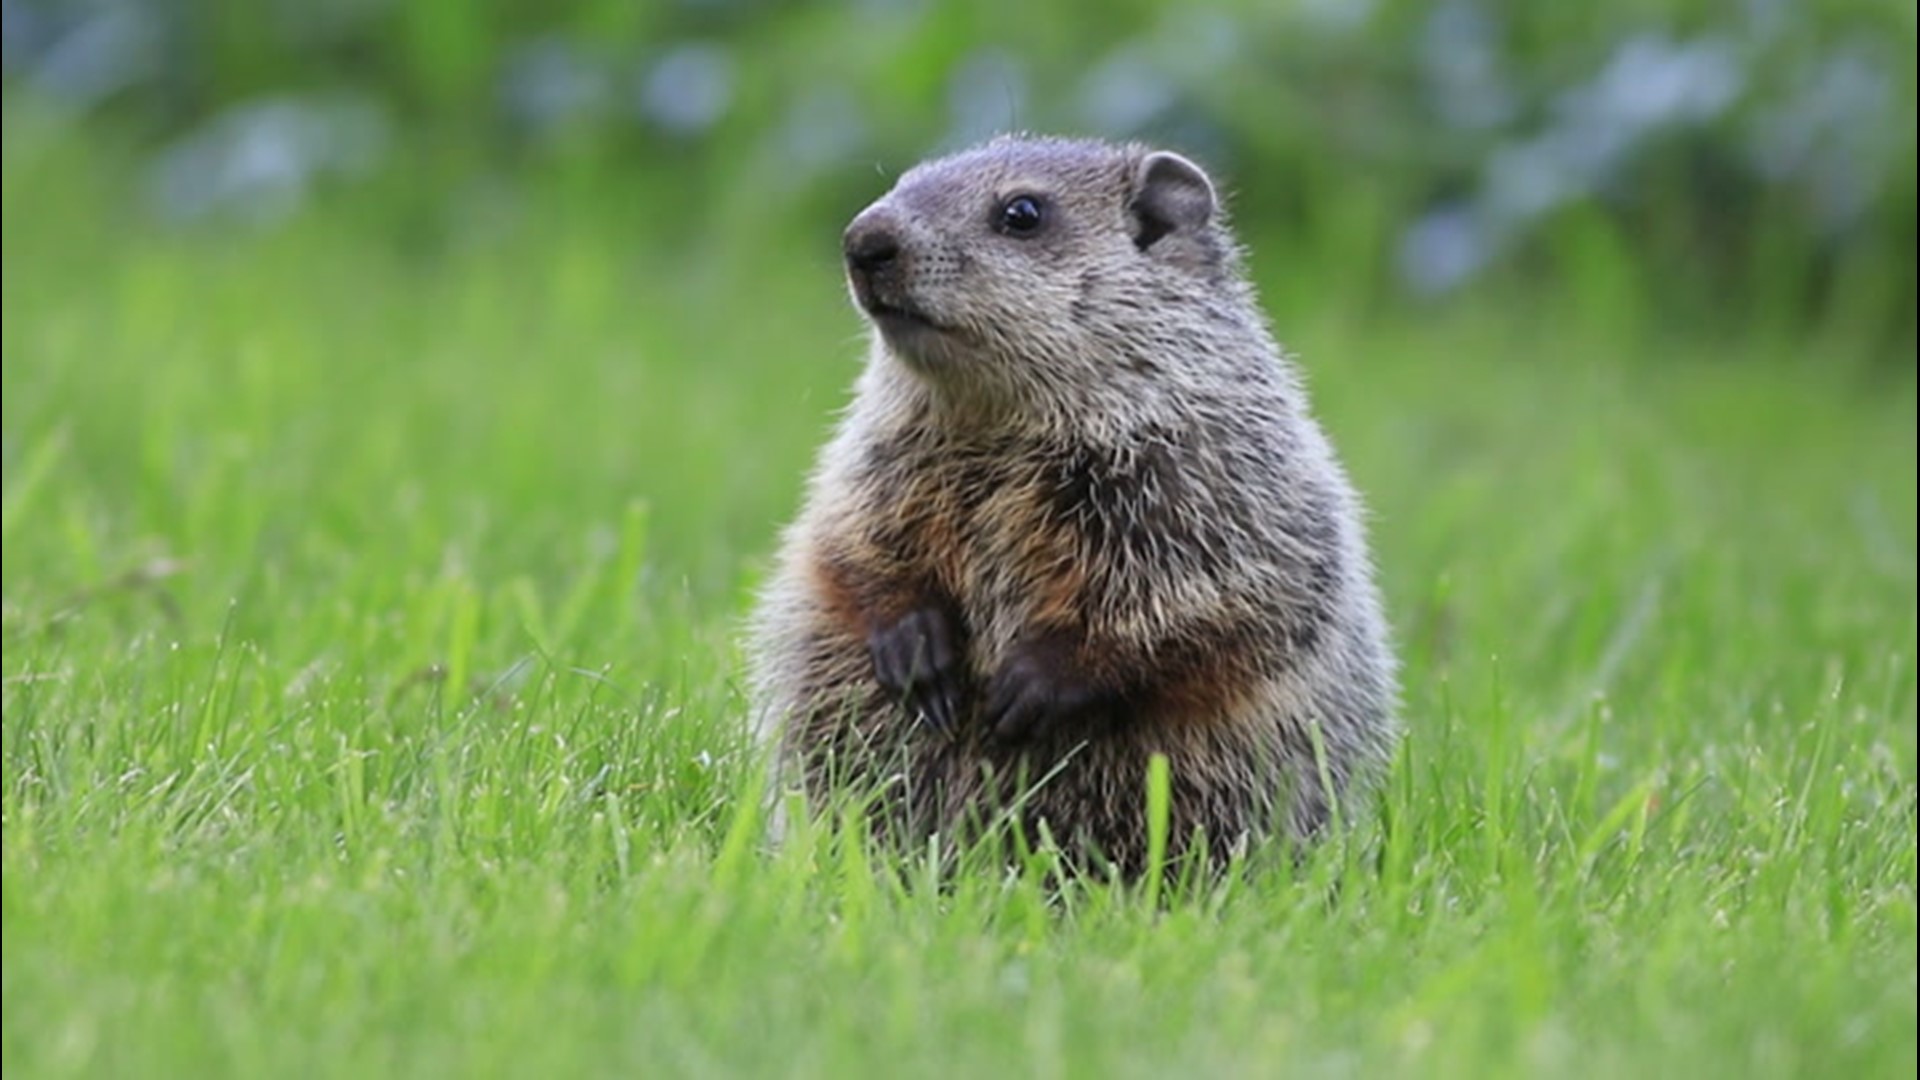 Because of the way that groundhogs hibernate in the winter, they get pretty cold to survive. Here's why.